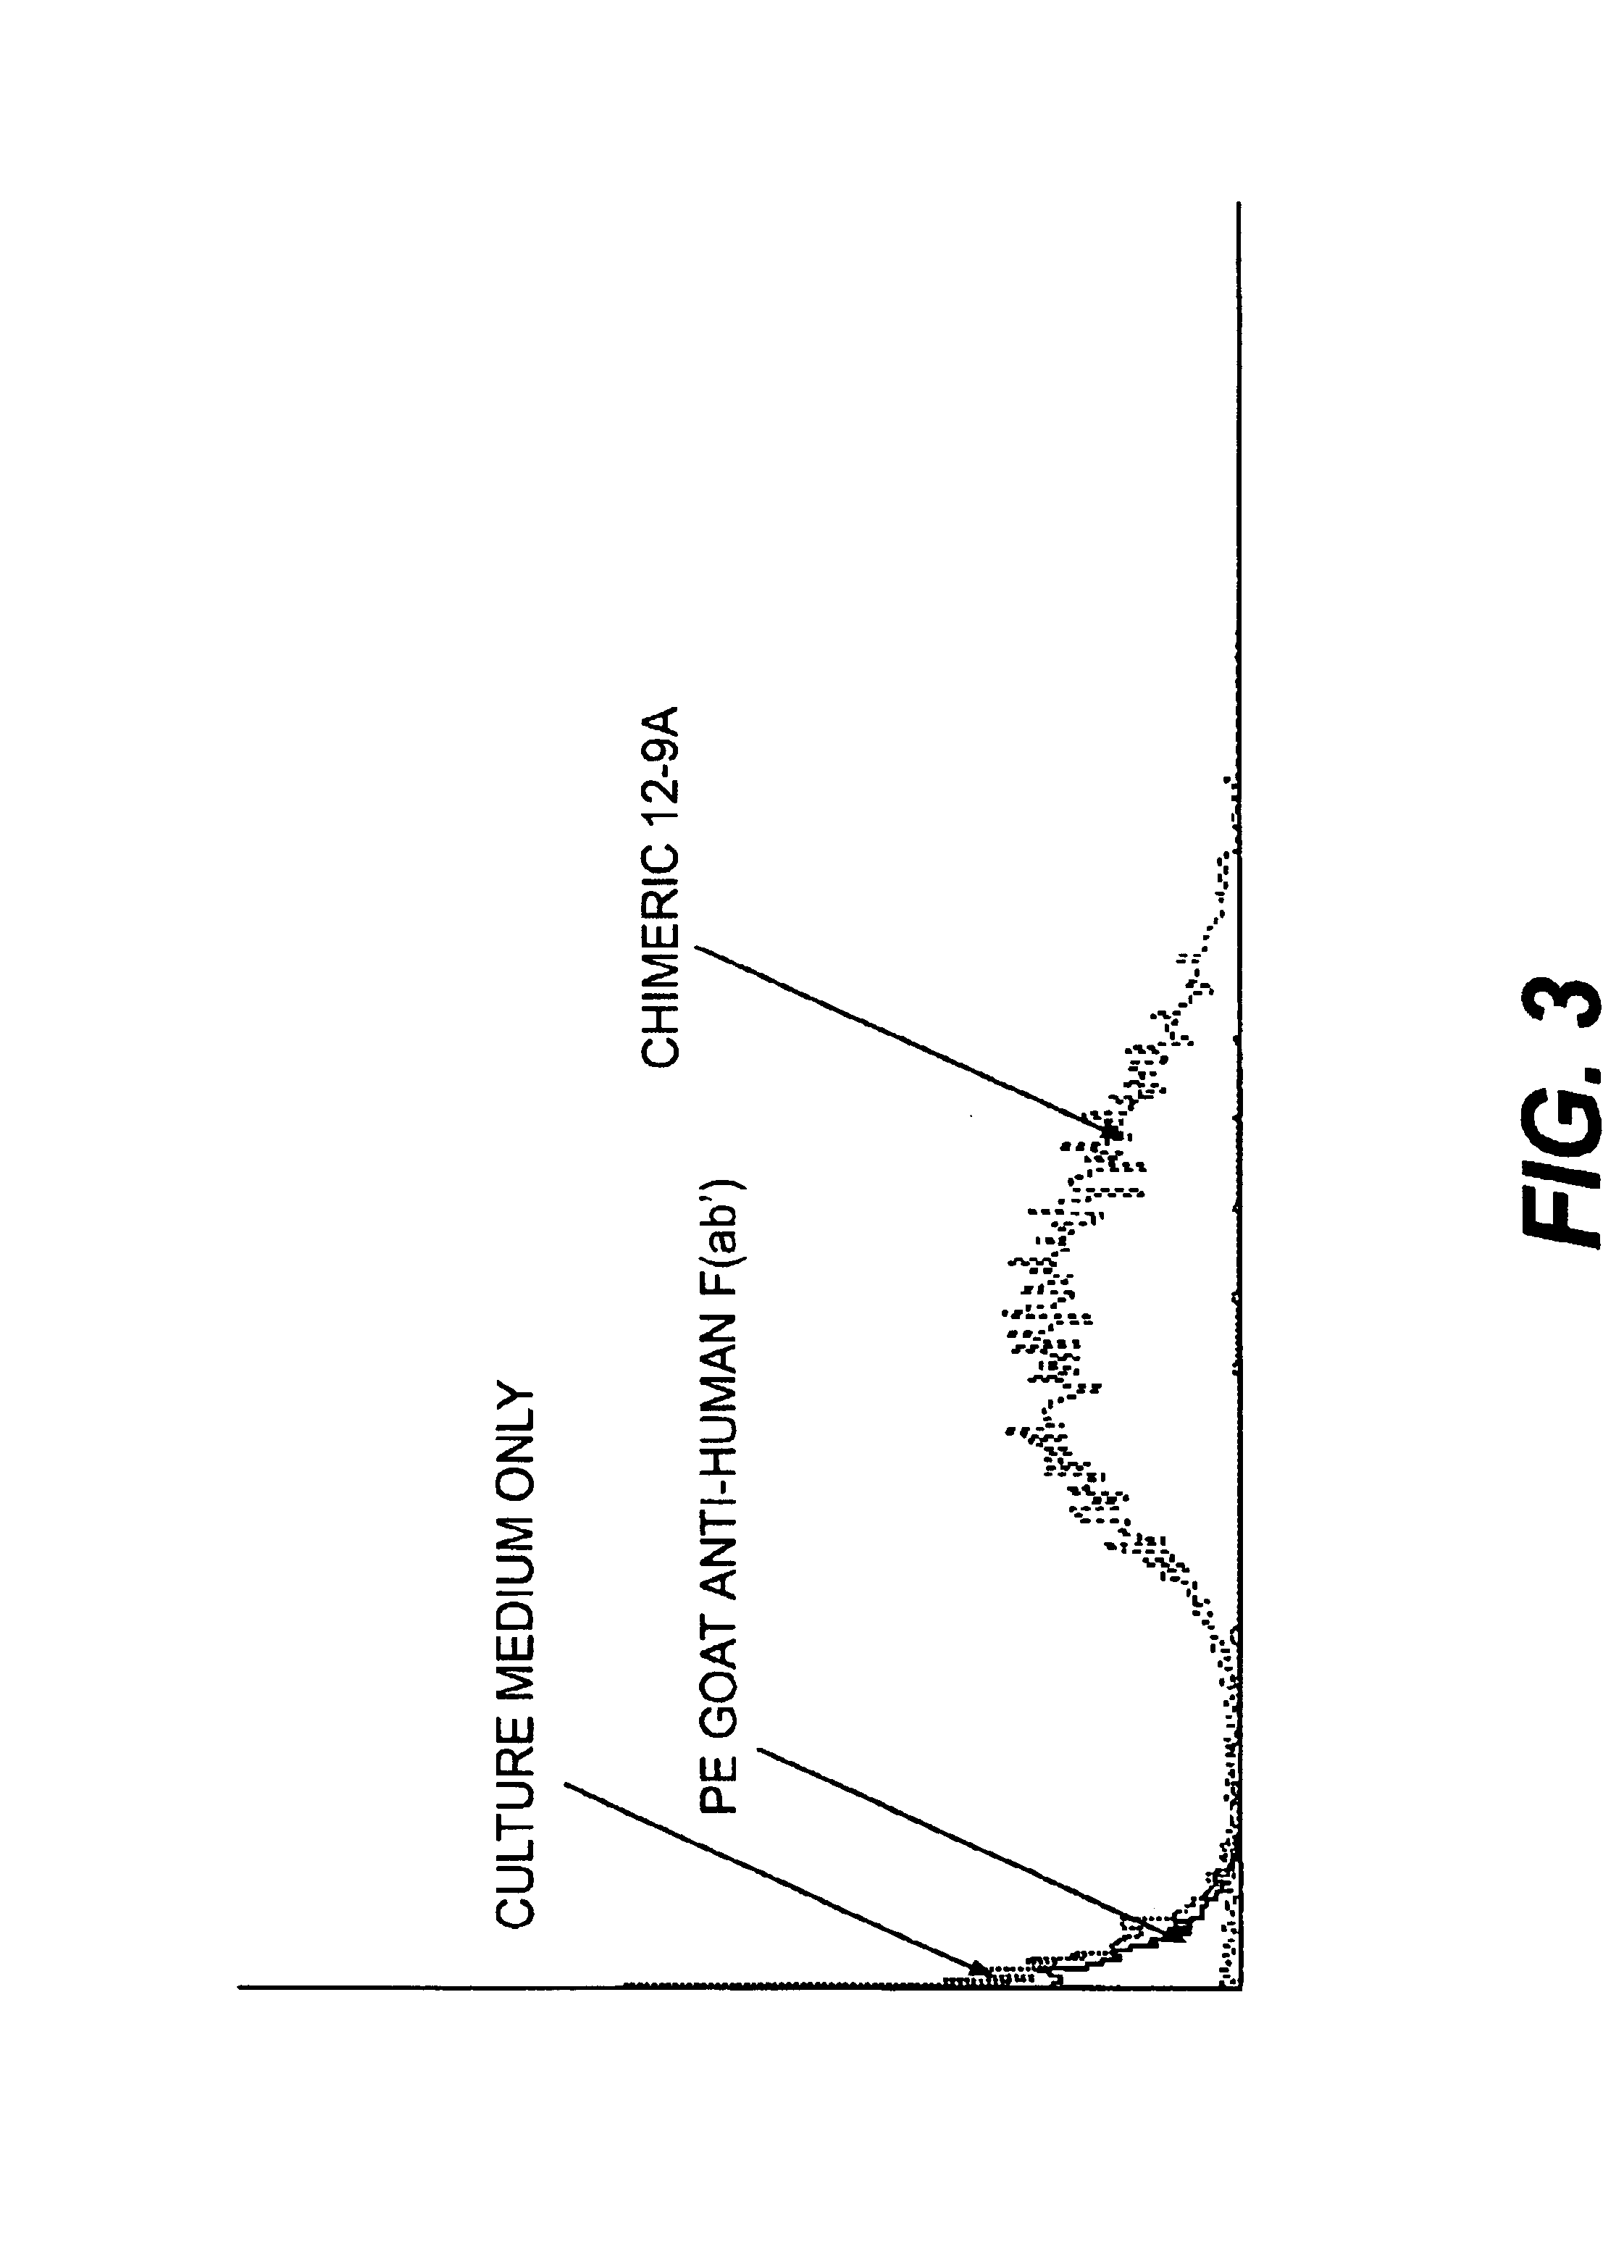 Monoclonal antibodies to the ClfA protein and method of use in treating or preventing infections